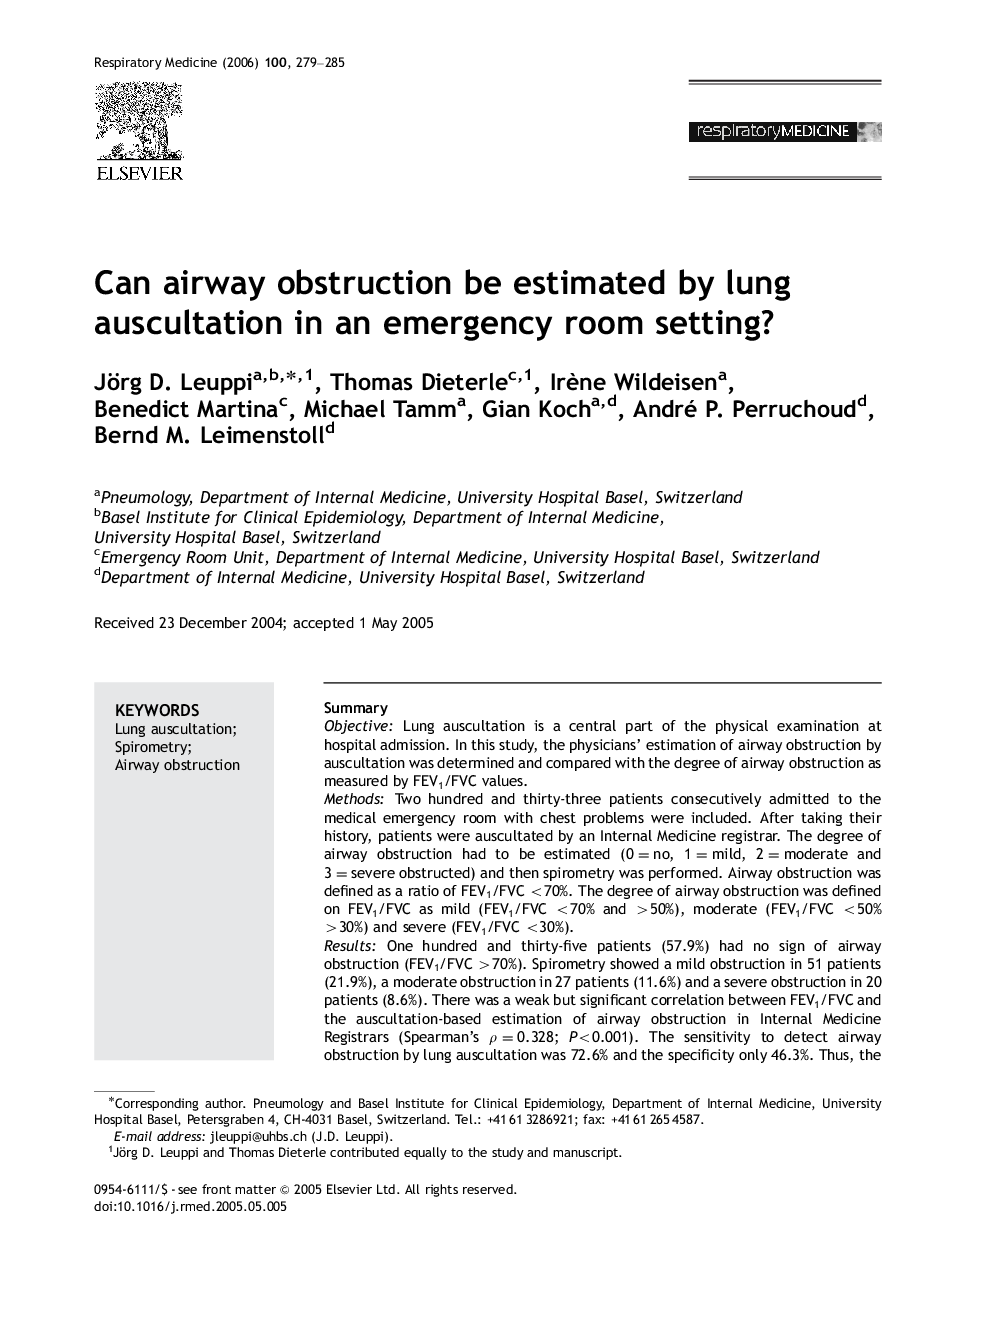 Can airway obstruction be estimated by lung auscultation in an emergency room setting?